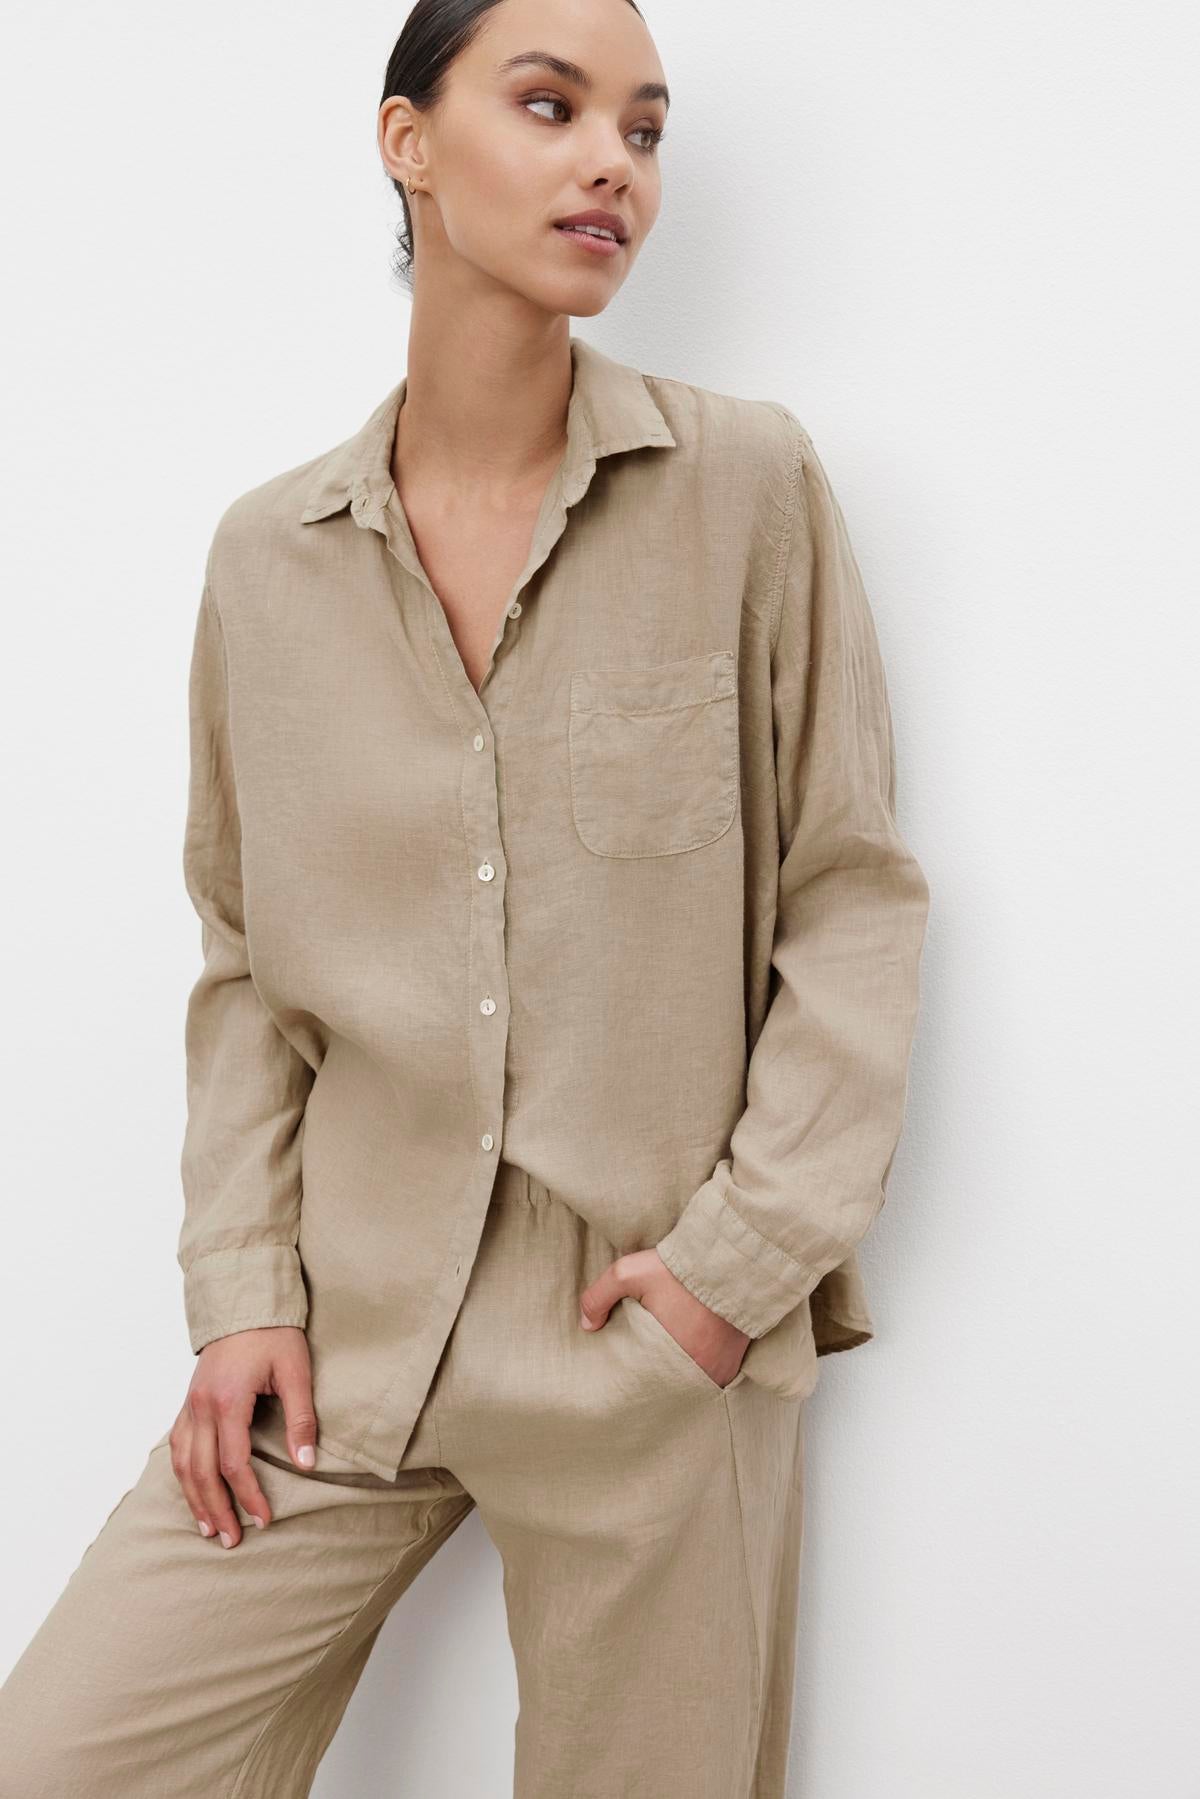   A person wearing a light brown Velvet by Jenny Graham MULHOLLAND LINEN SHIRT with a scooped hemline and matching trousers stands against a white background, with one hand in their pocket. 